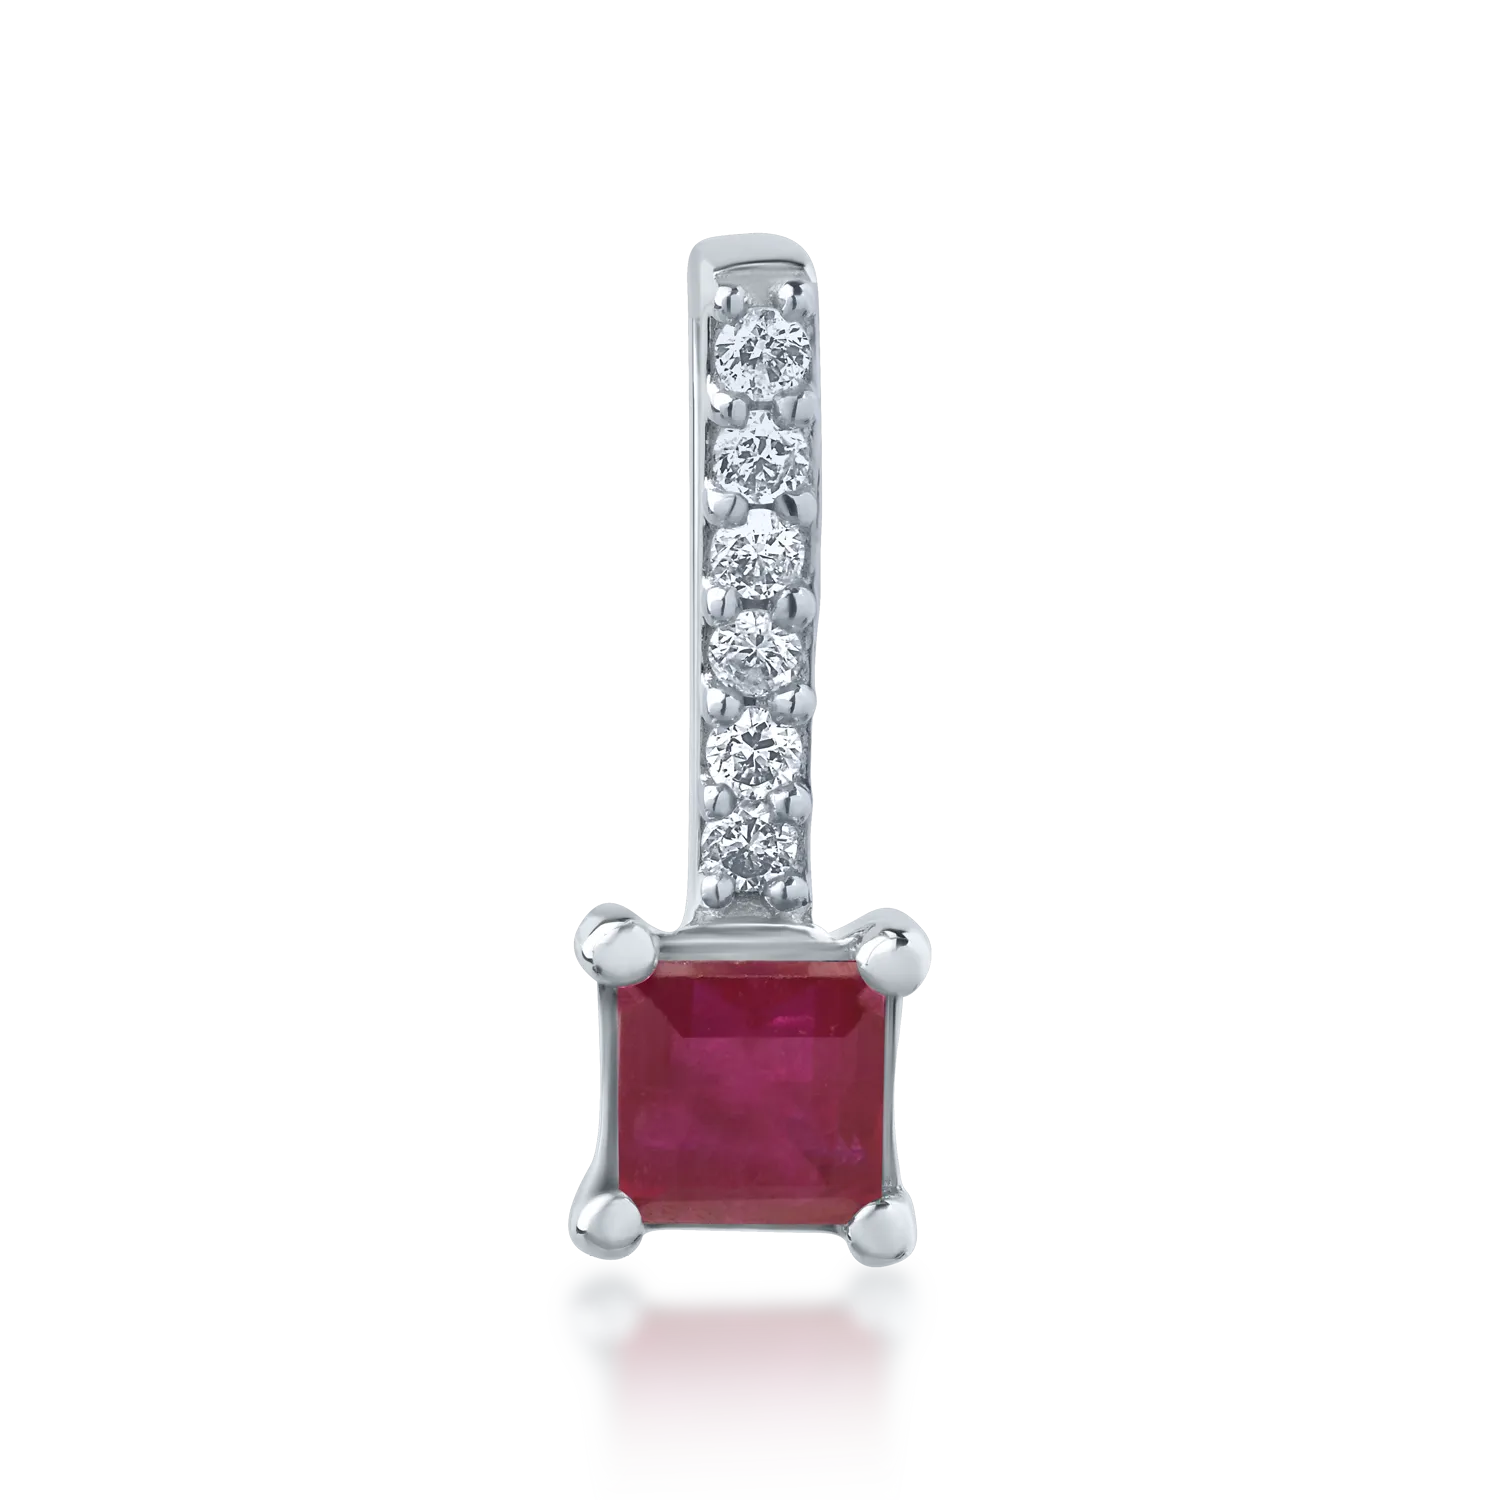 14K white gold pendant with a 0.182ct ruby and 0.03ct diamonds